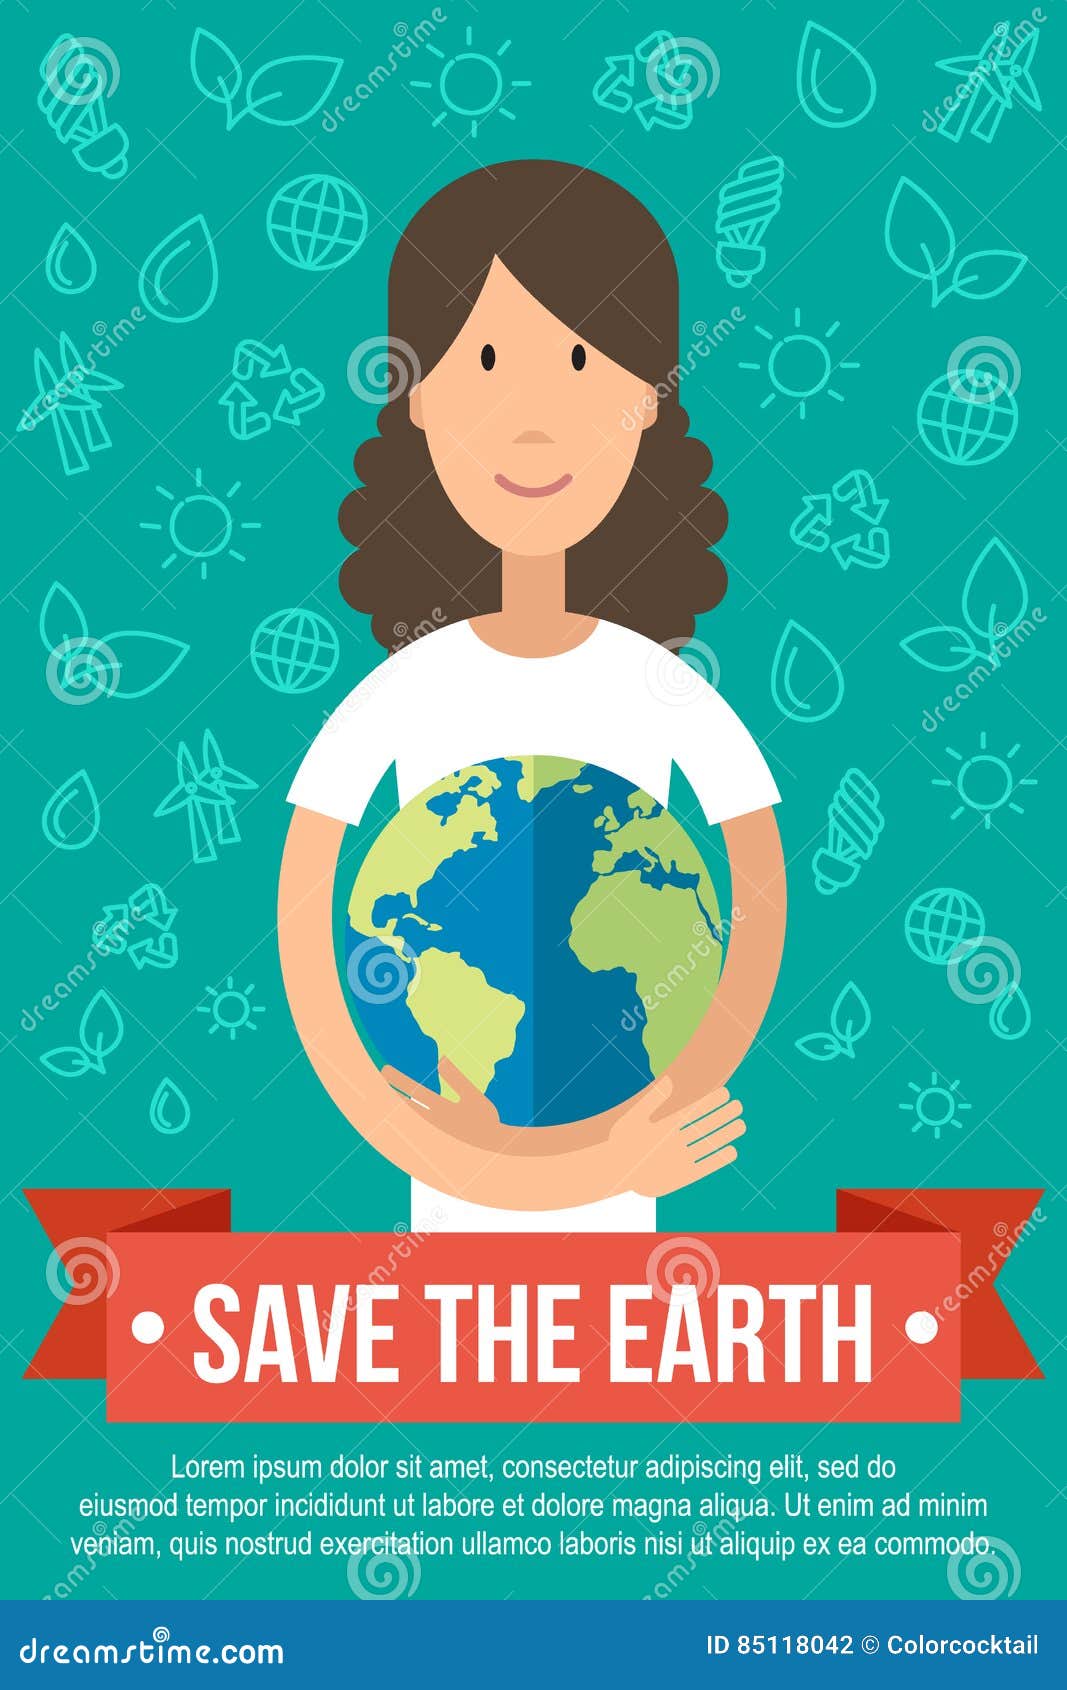 Save The Earth Poster Stock Vector - Image: 85118042